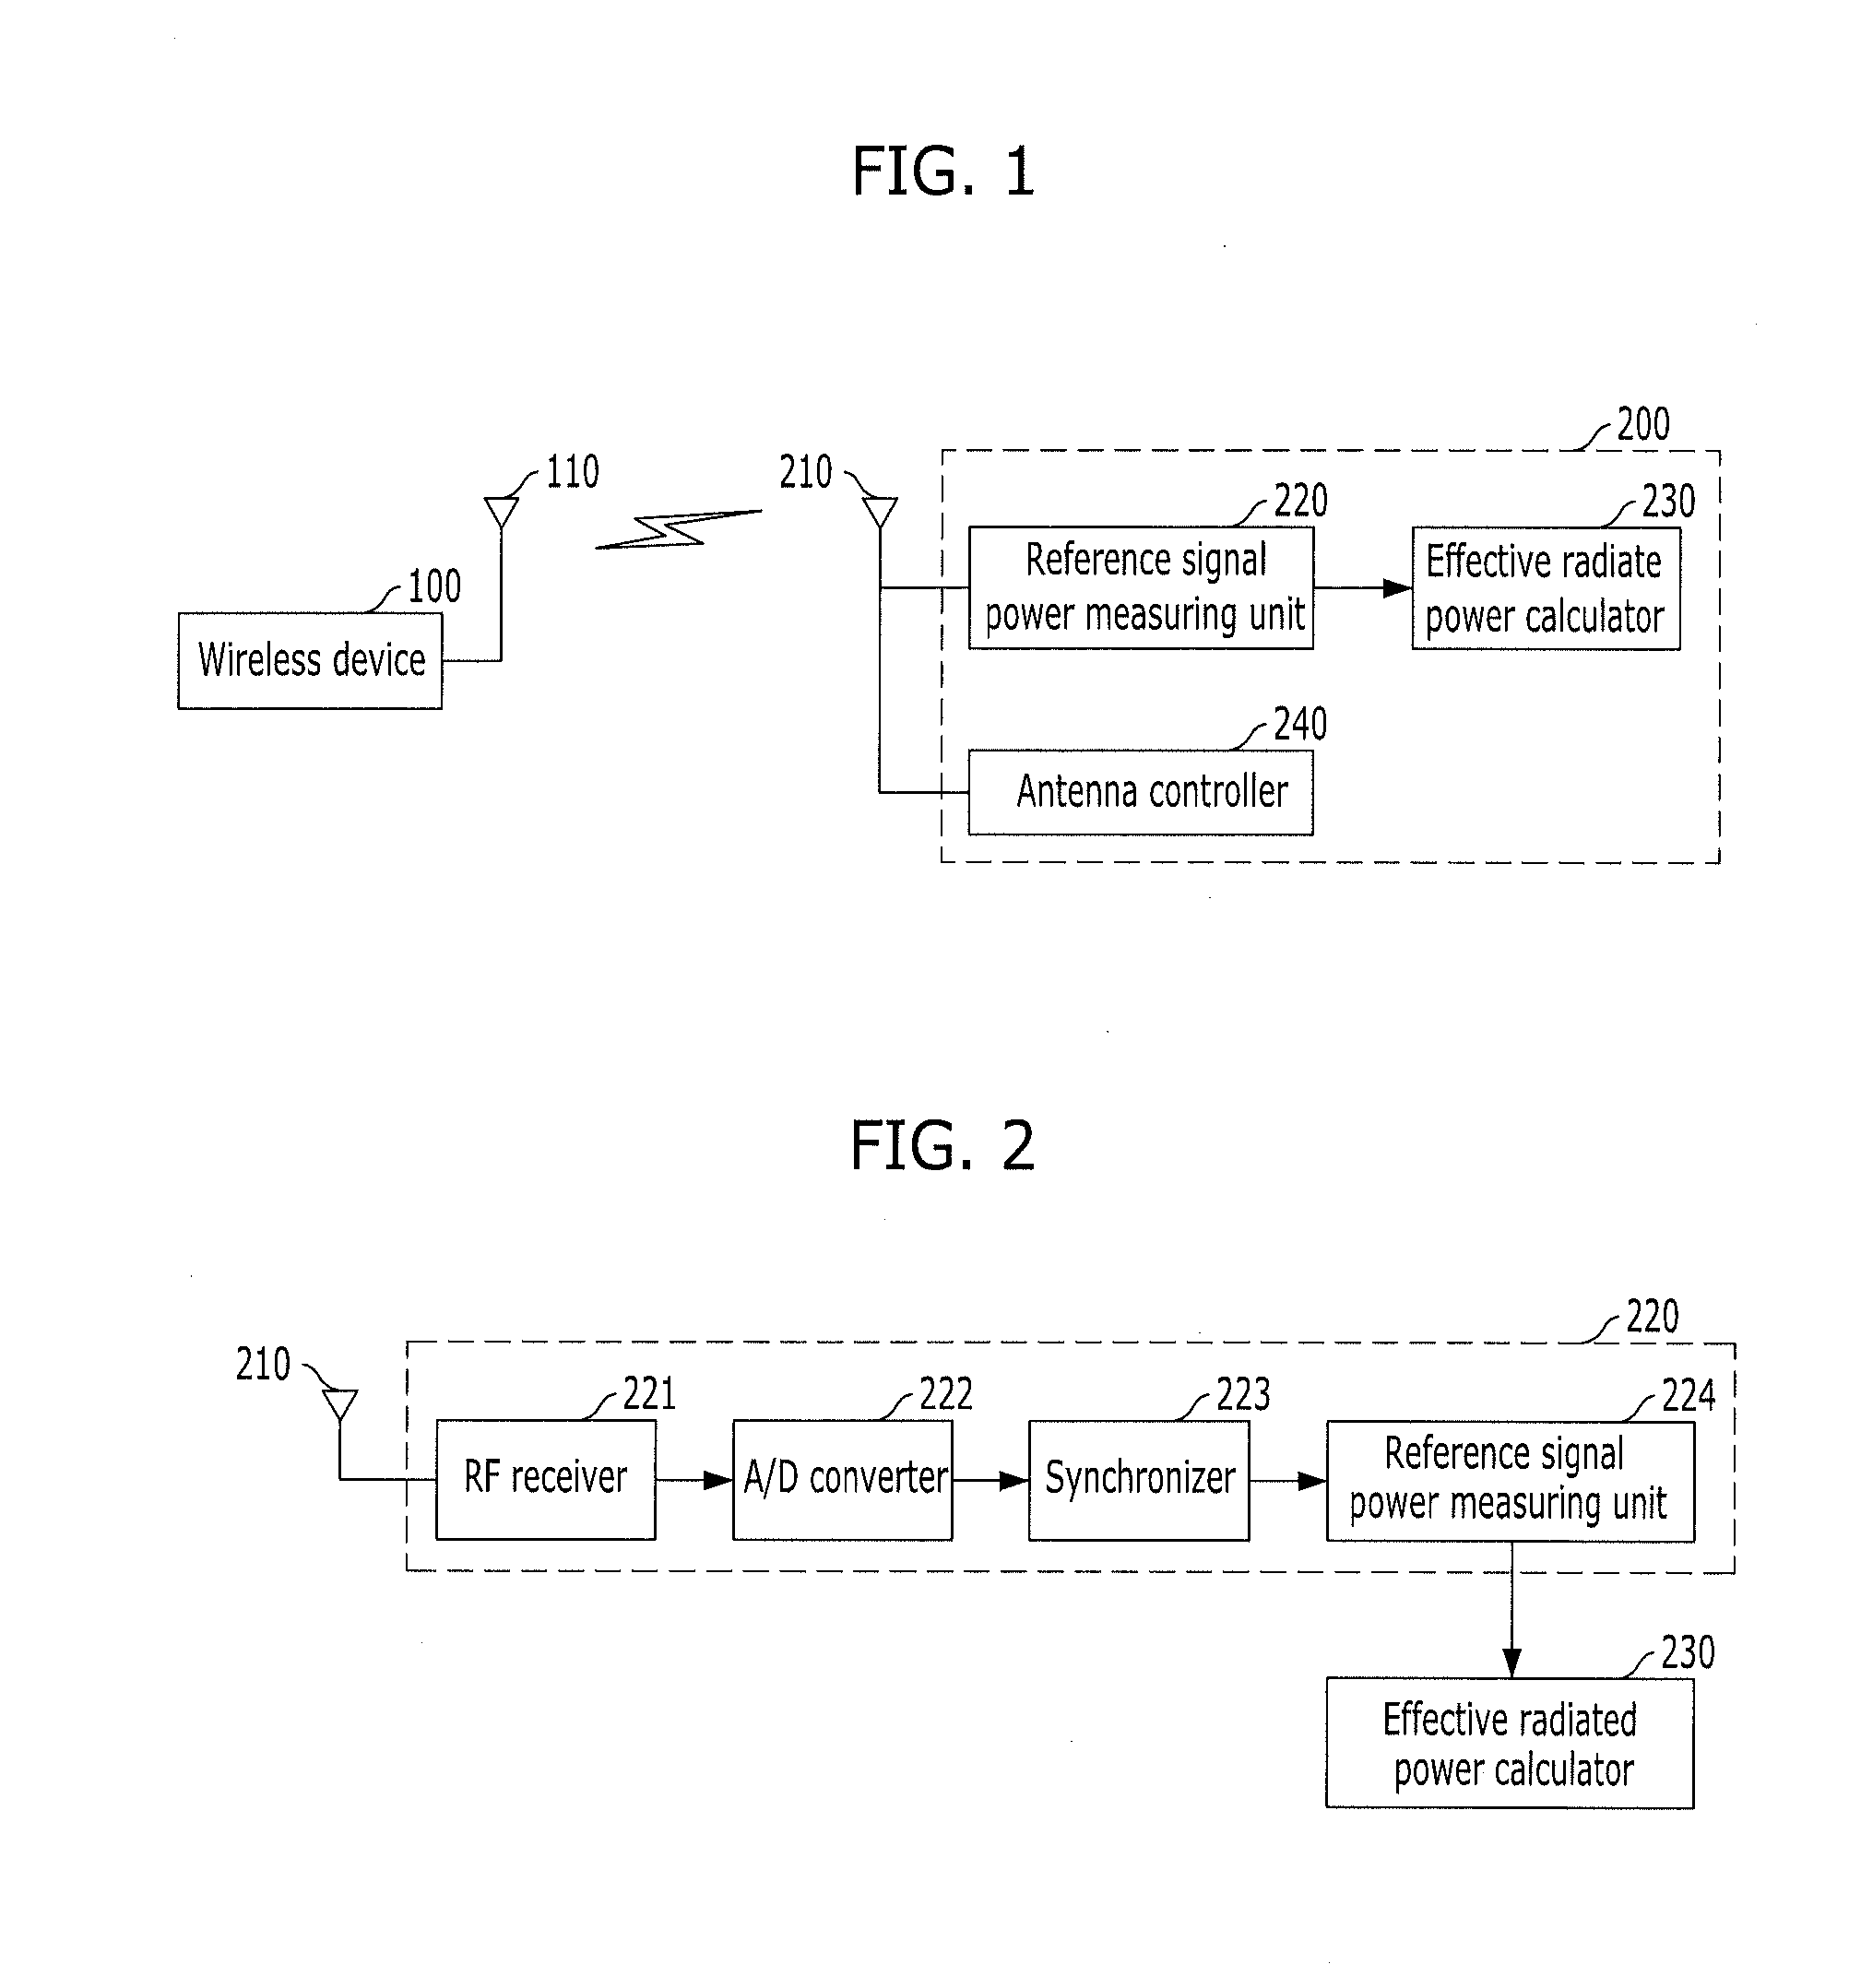 Apparatus and method for detecting effective radiated power